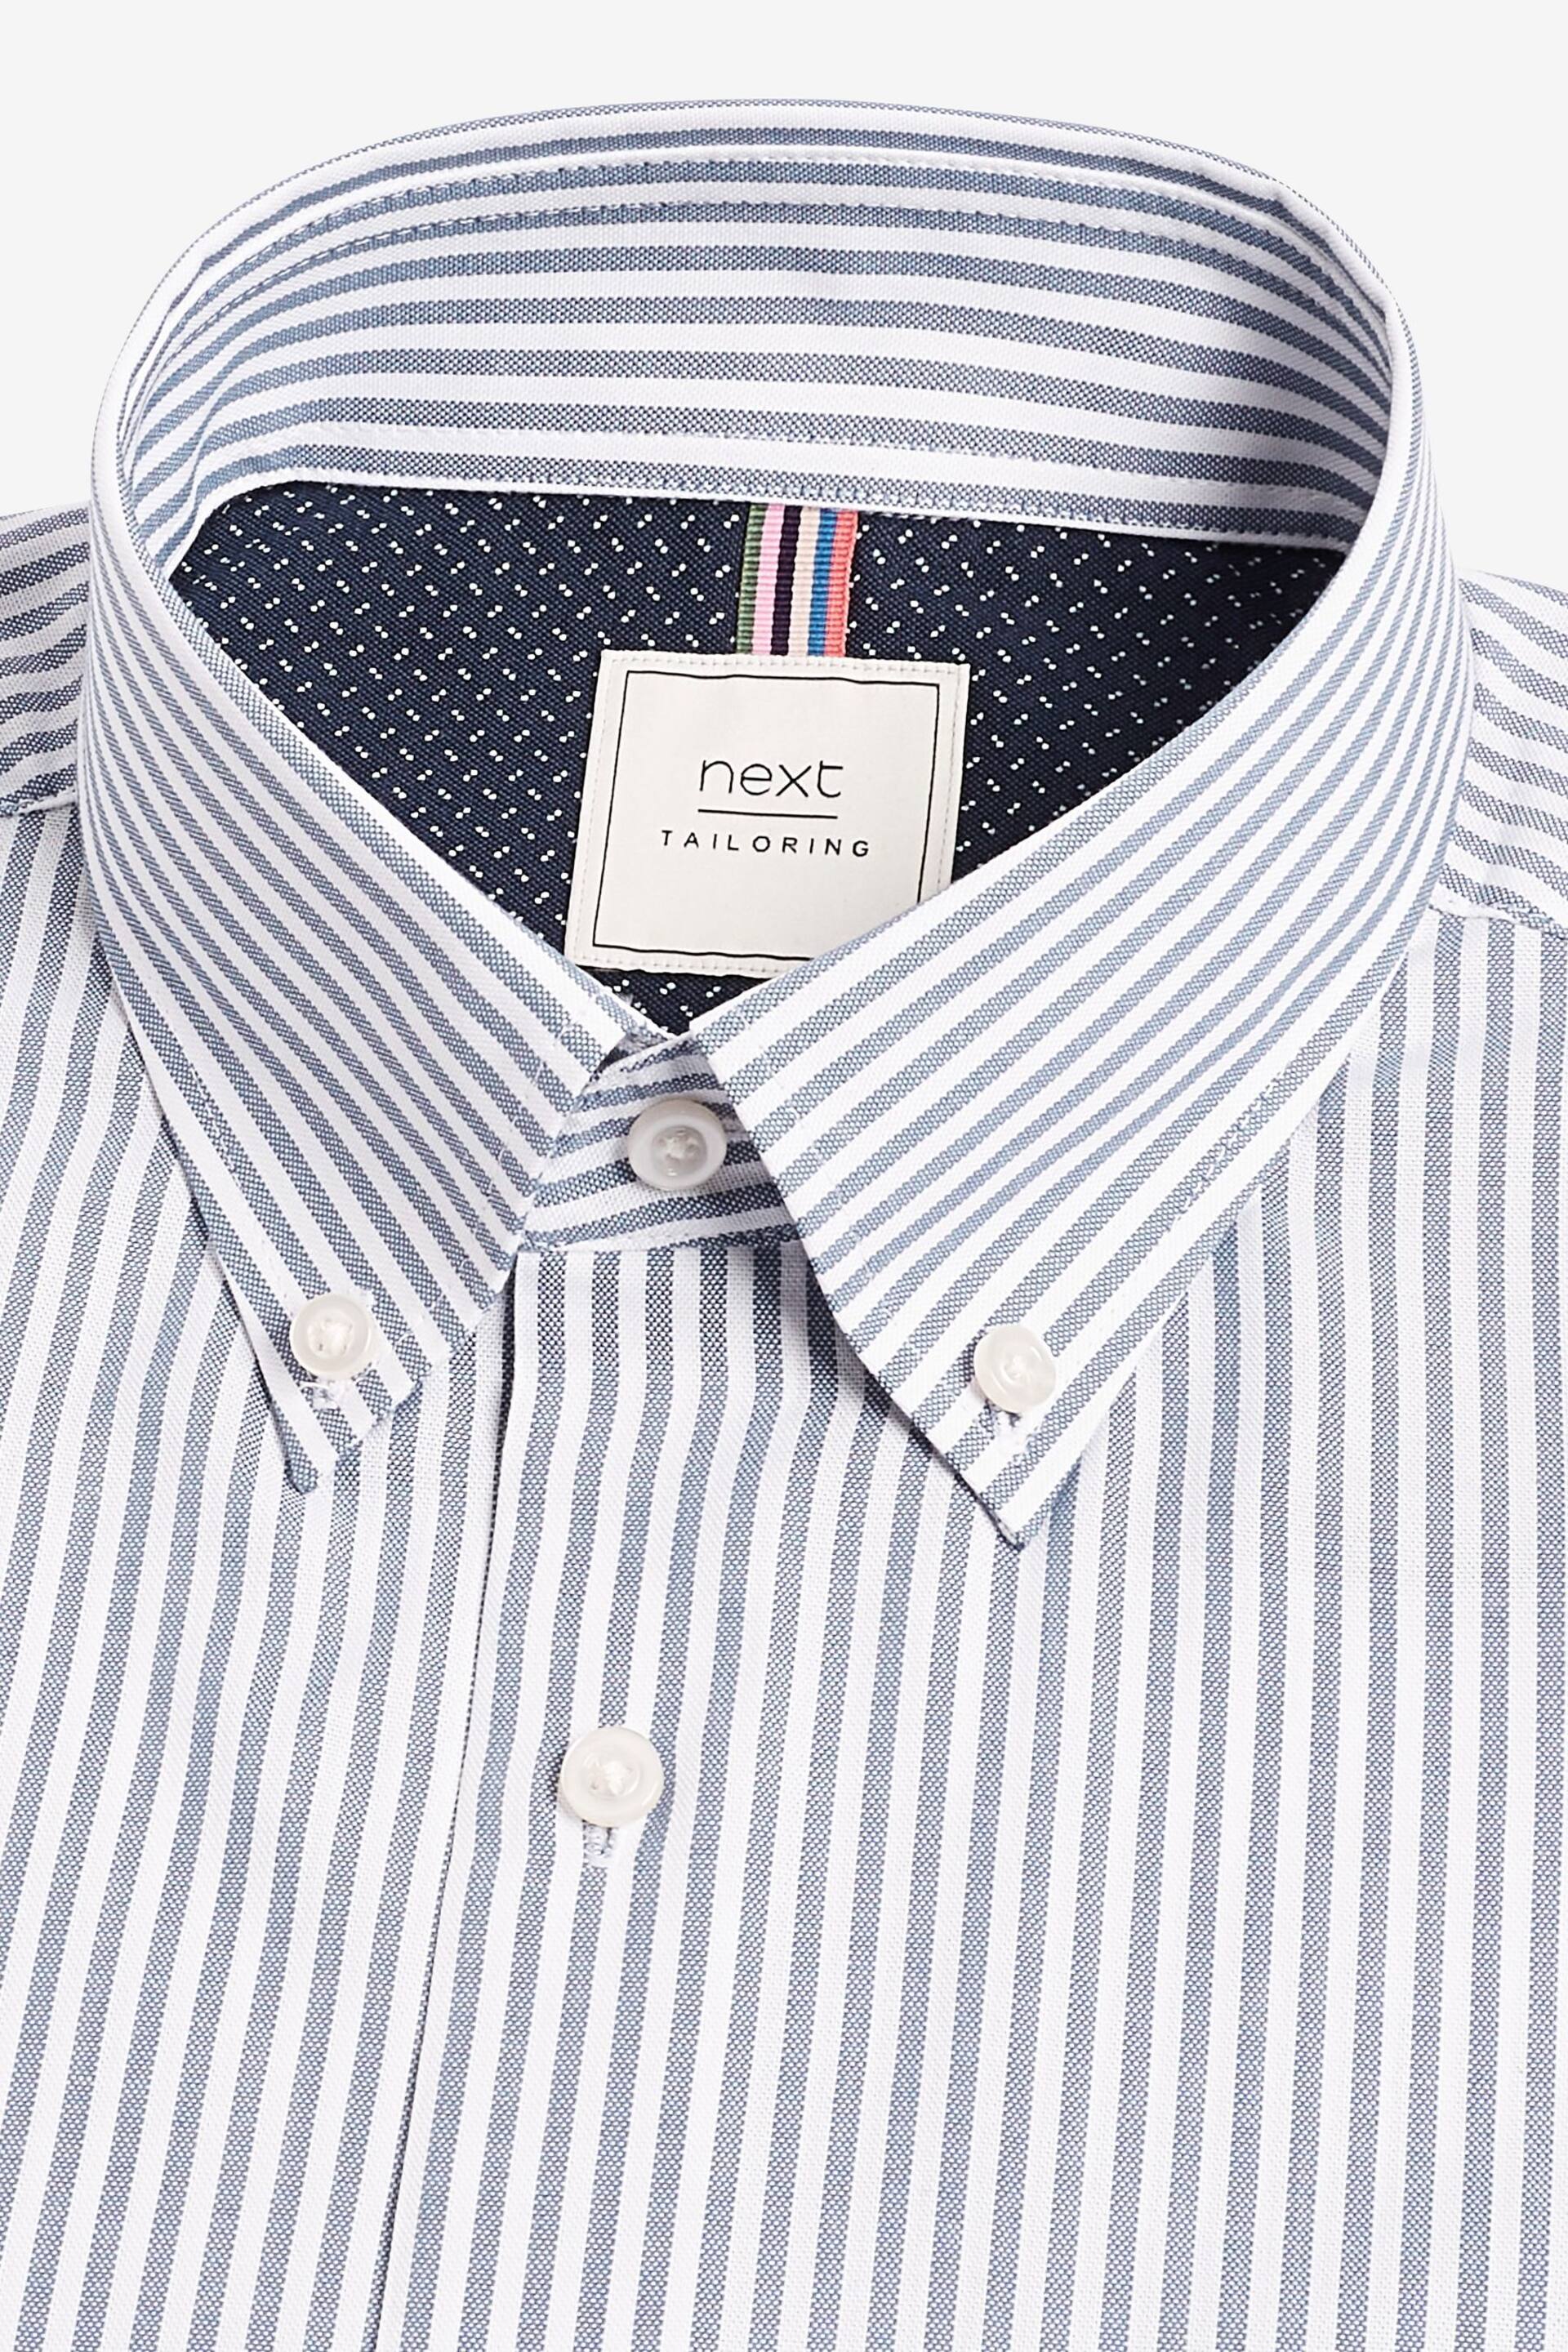 White/Blue Stripe Regular Fit Easy Iron Button Down Oxford Shirt - Image 7 of 9